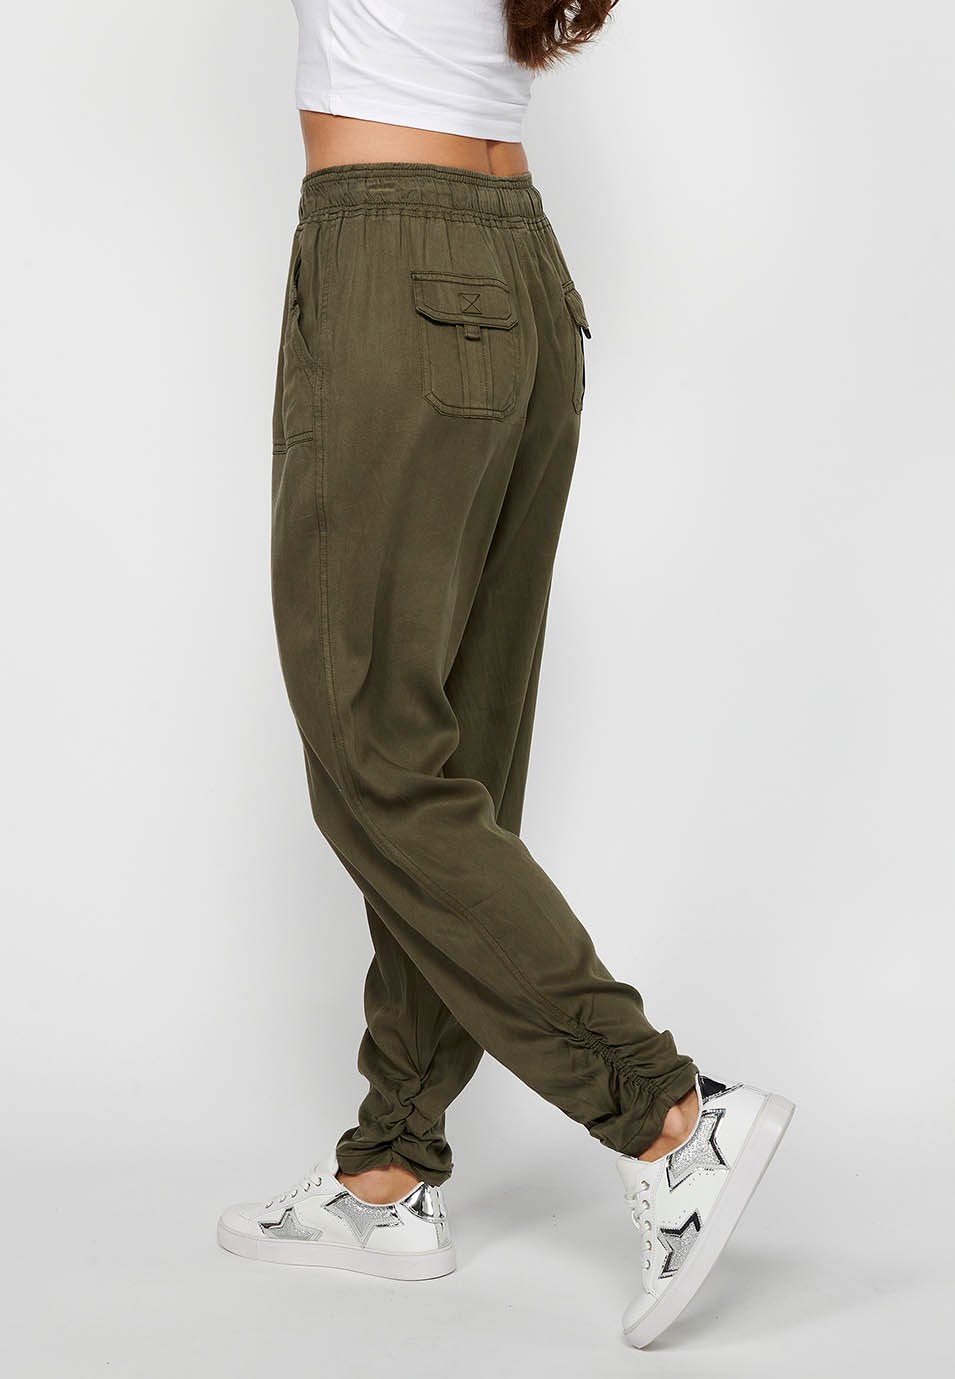 Long jogger pants with curled finish and rubberized waist with four pockets, two rear pockets with flap in Khaki color for women 6